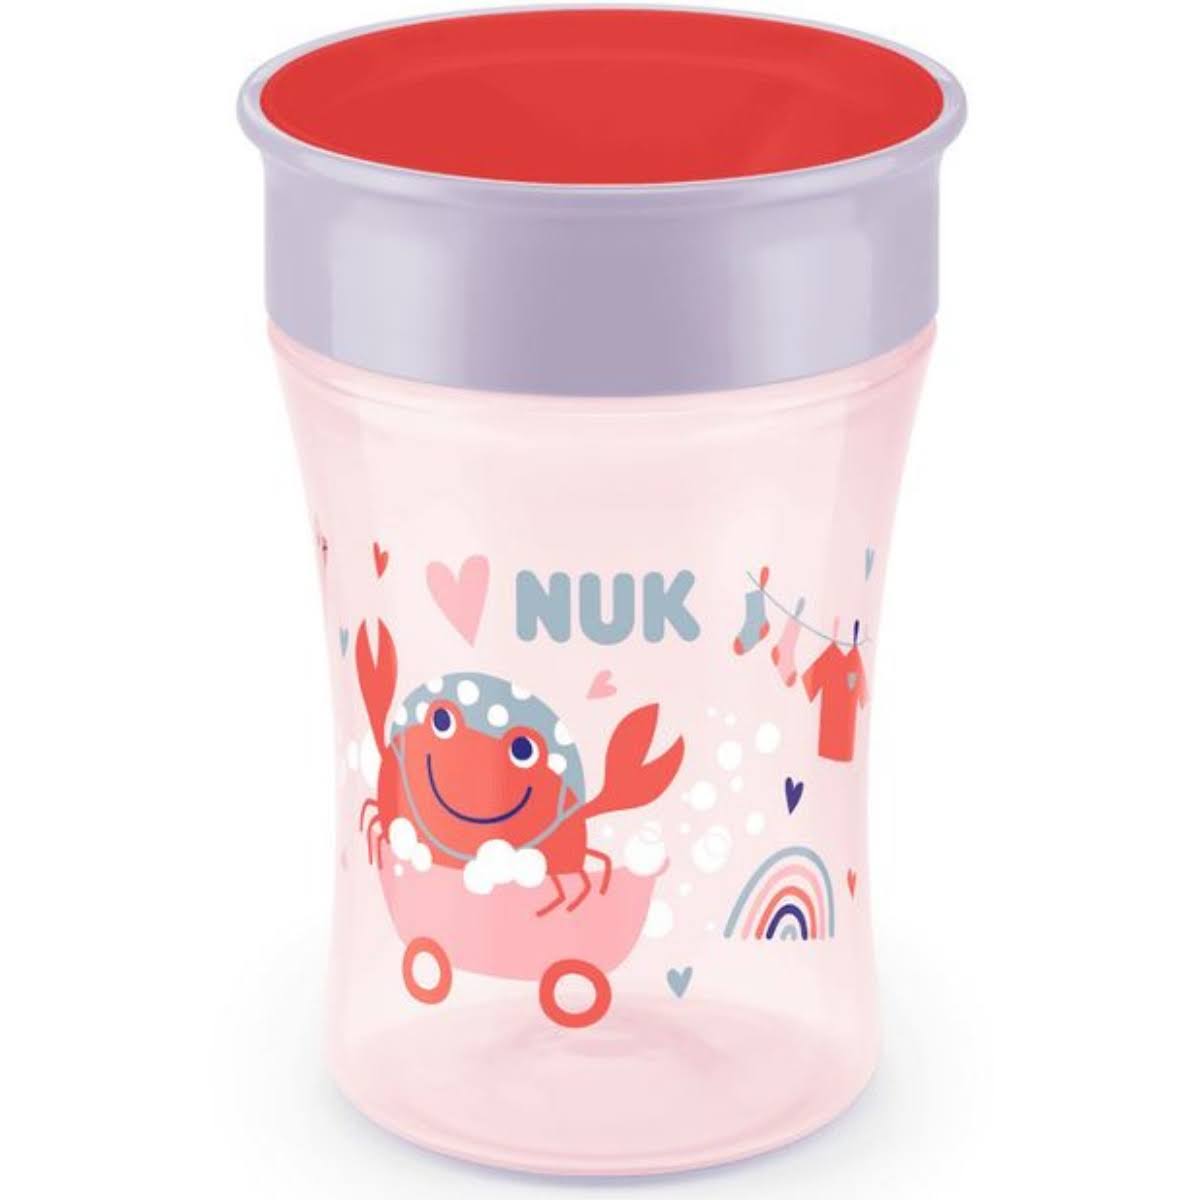 Nuk Magic Cup - Cup, Drinking Cup, Pink, 8+m